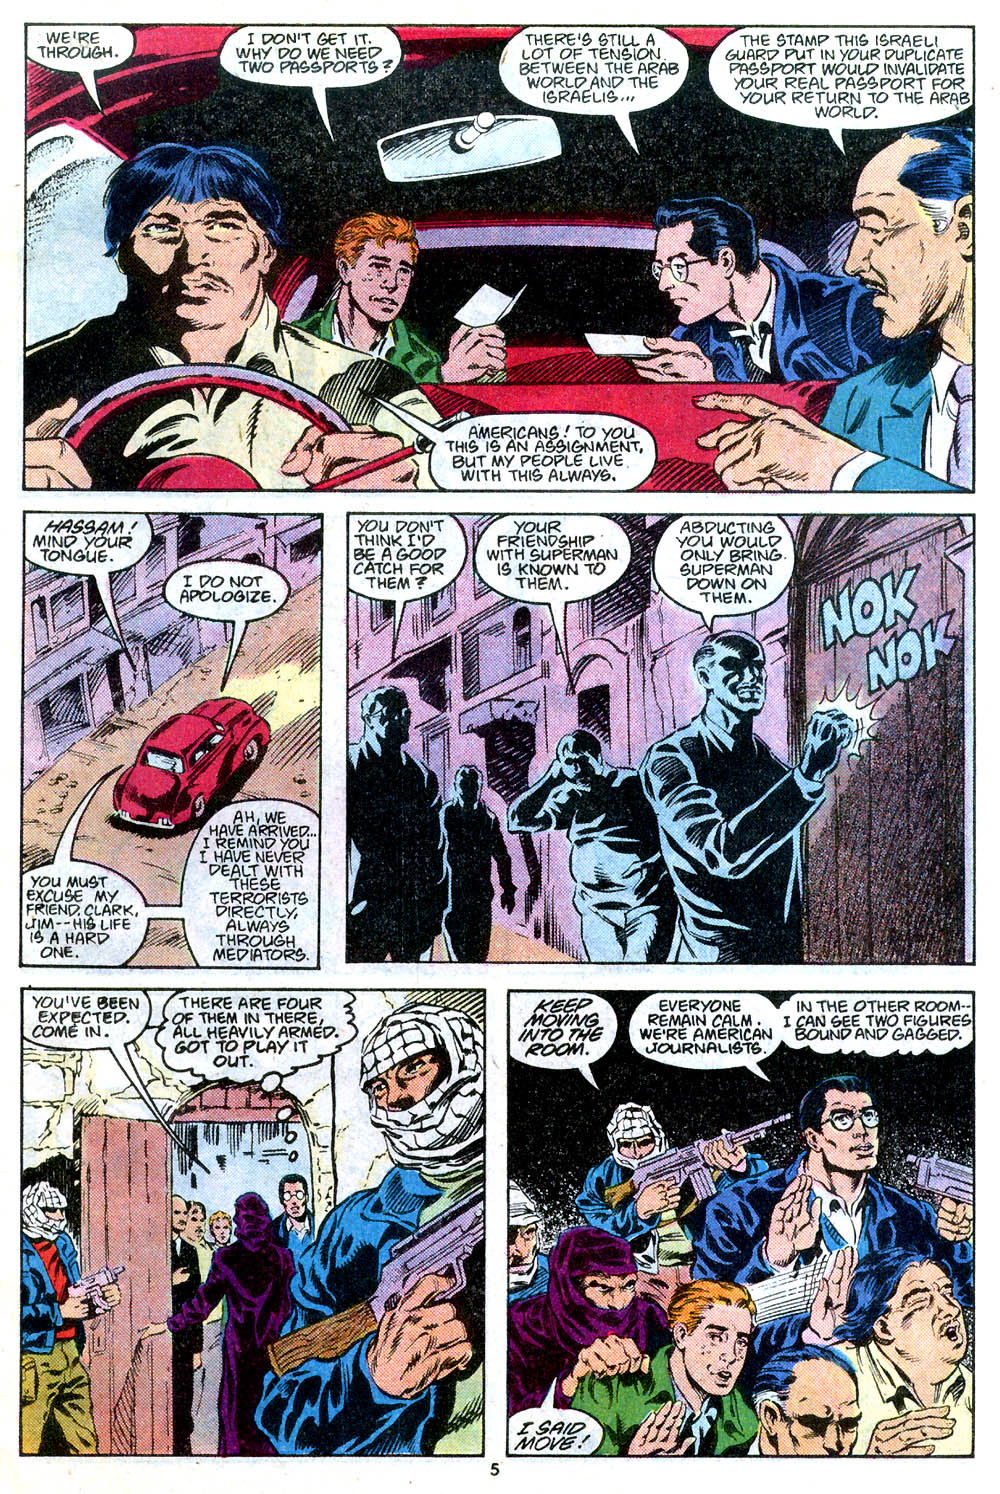 Adventures of Superman (1987) 443 Page 5